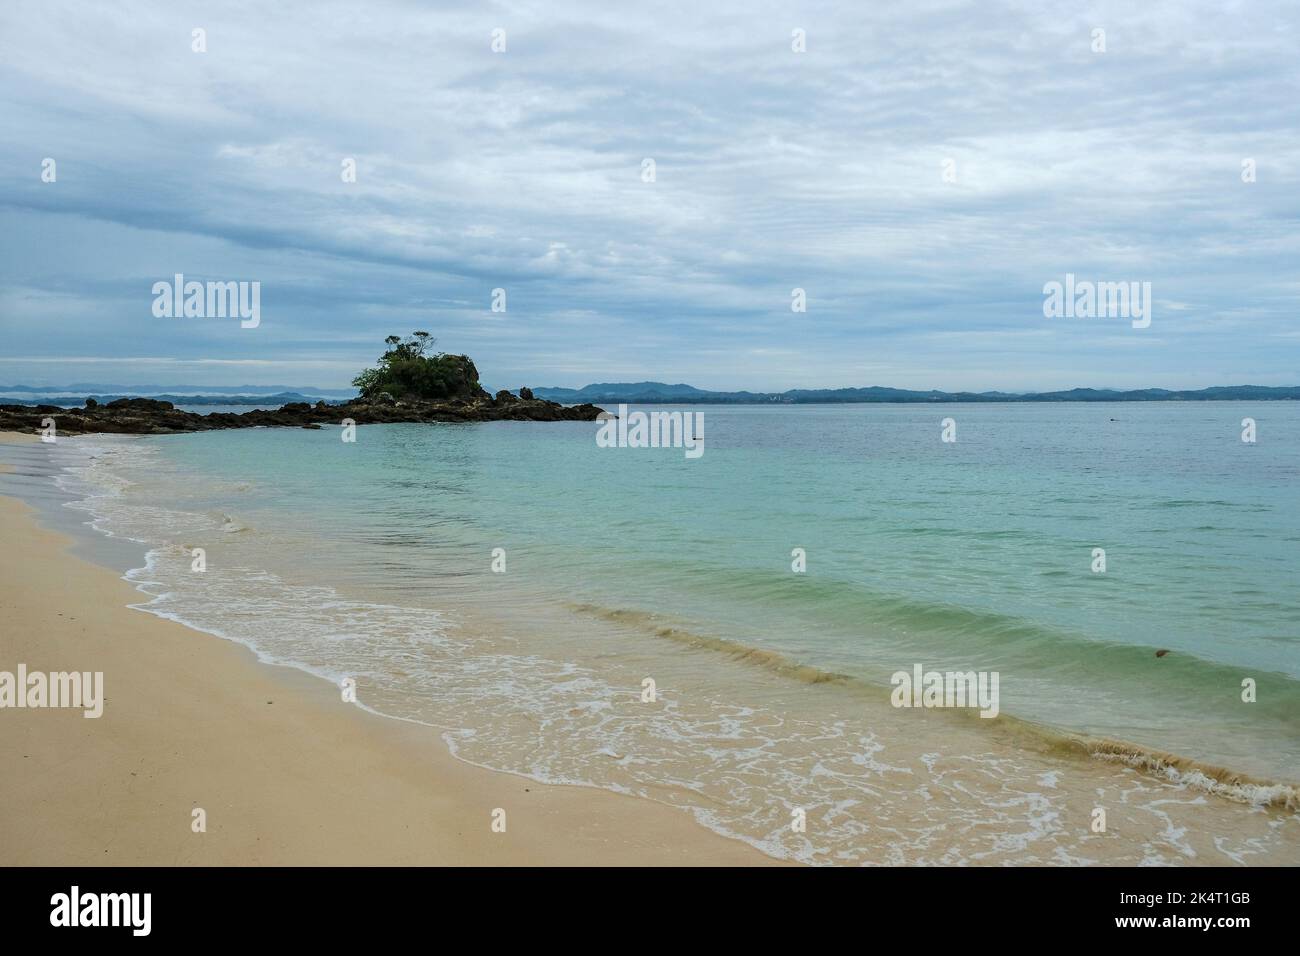 Views of a beach on Kapas Island in the Marang District in Malaysia ...